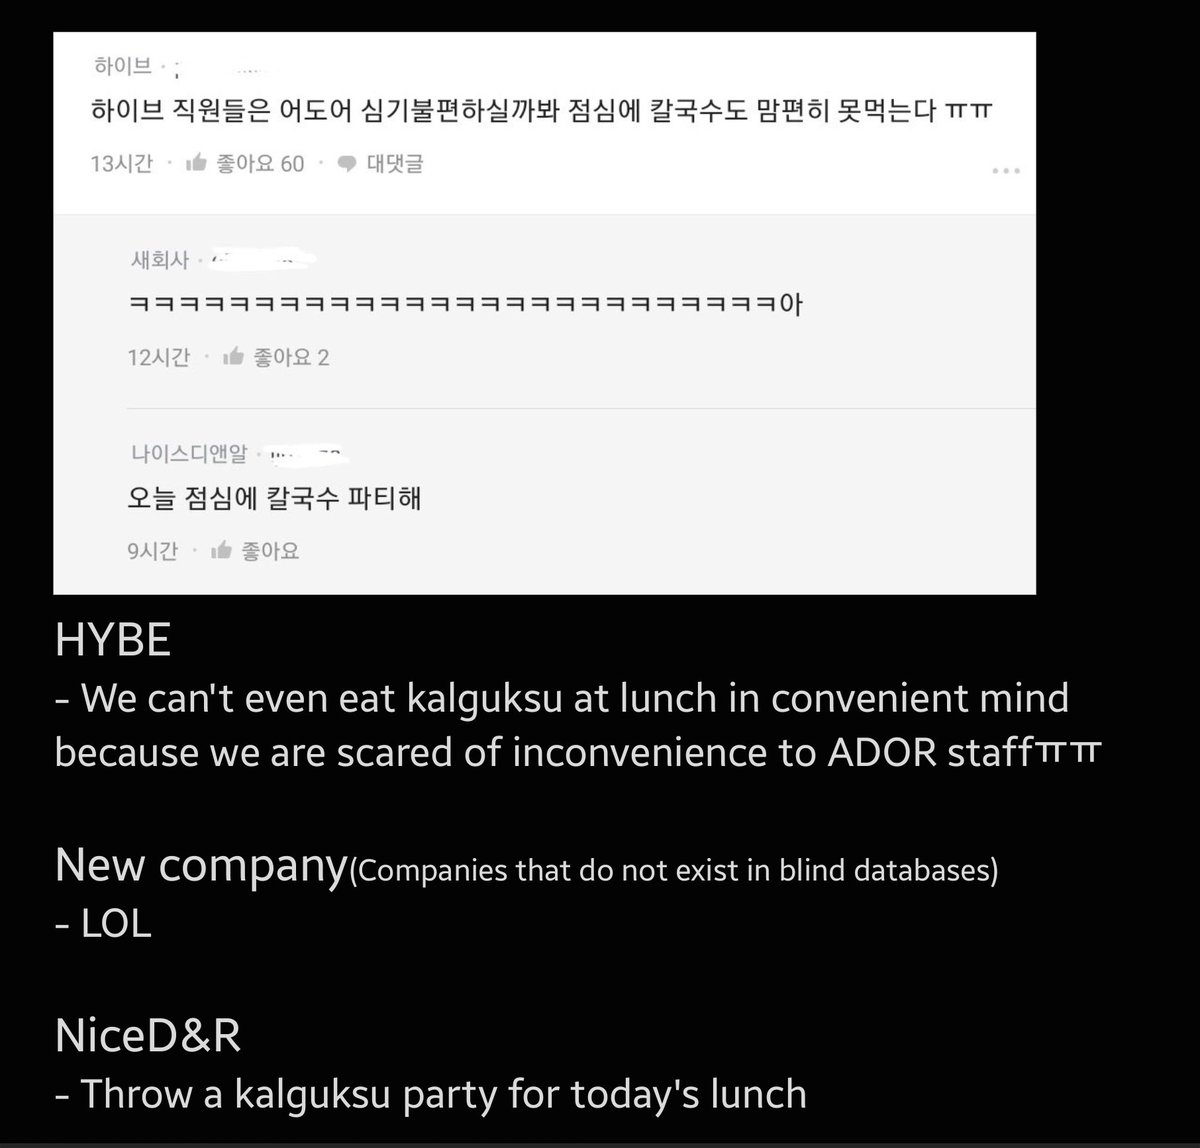 I wasn't going to post this because International are going to really offended, but do you all still think HYBE's SOBs in Blind respect NewJeans and ADOR? They even mocked their artists in front of other company's staff.